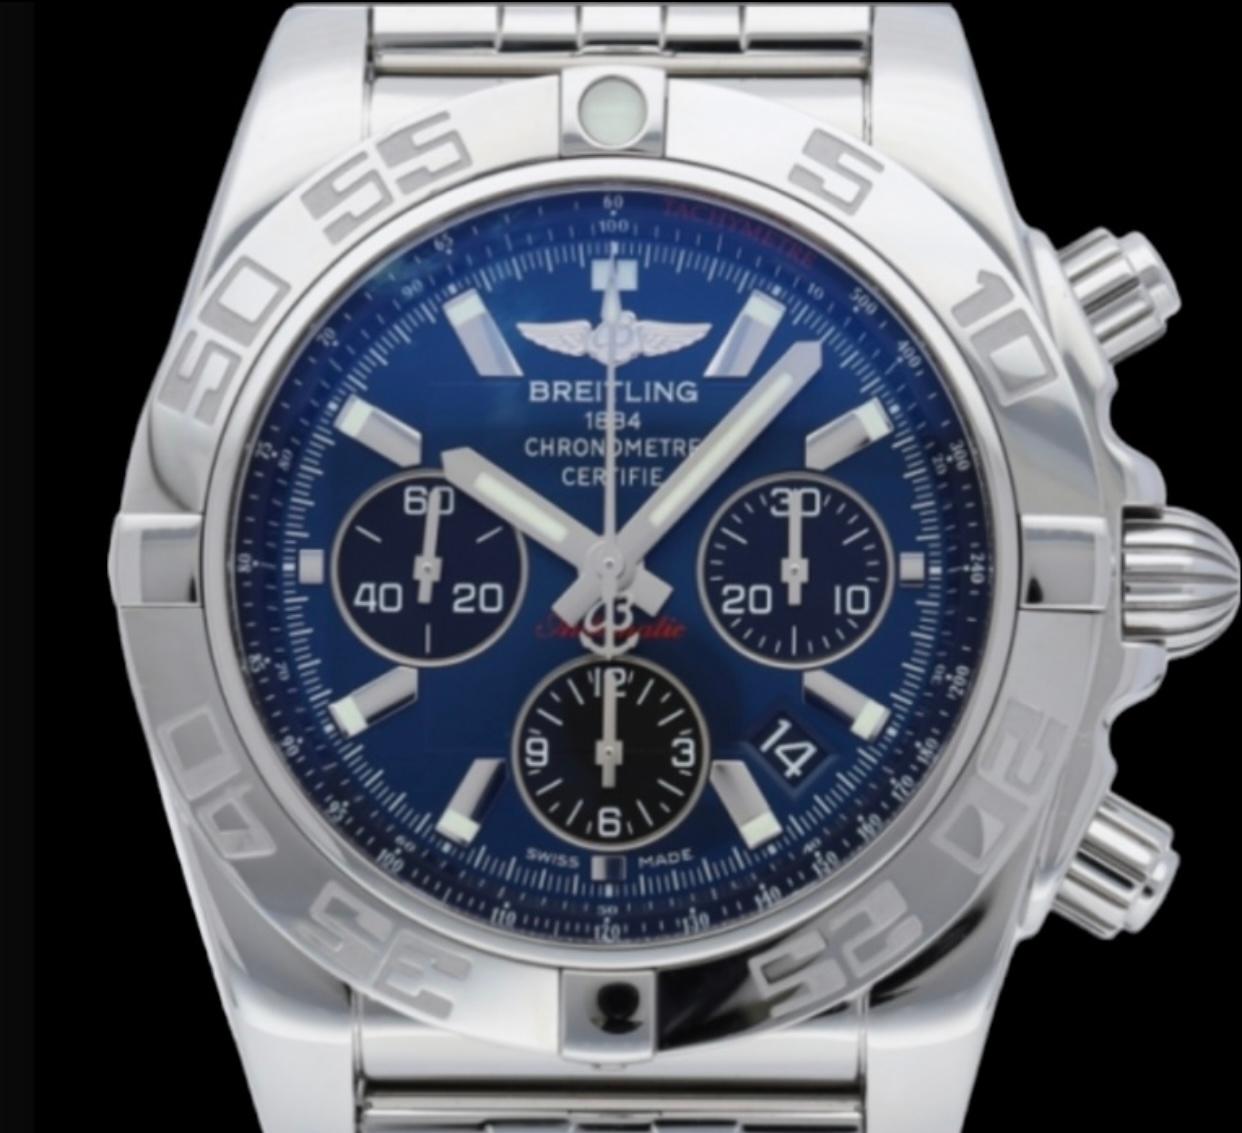 Breitling Chronomat 

Year 2020

¡Box papers!

Dial: Blue  

Case Size: 44 mm 

Movement: Automatic 

Will fit up to 8 wrists. 

Every watch we sell is 100% authentic guaranteed, in excellent working and cosmetic condition. Every watch is